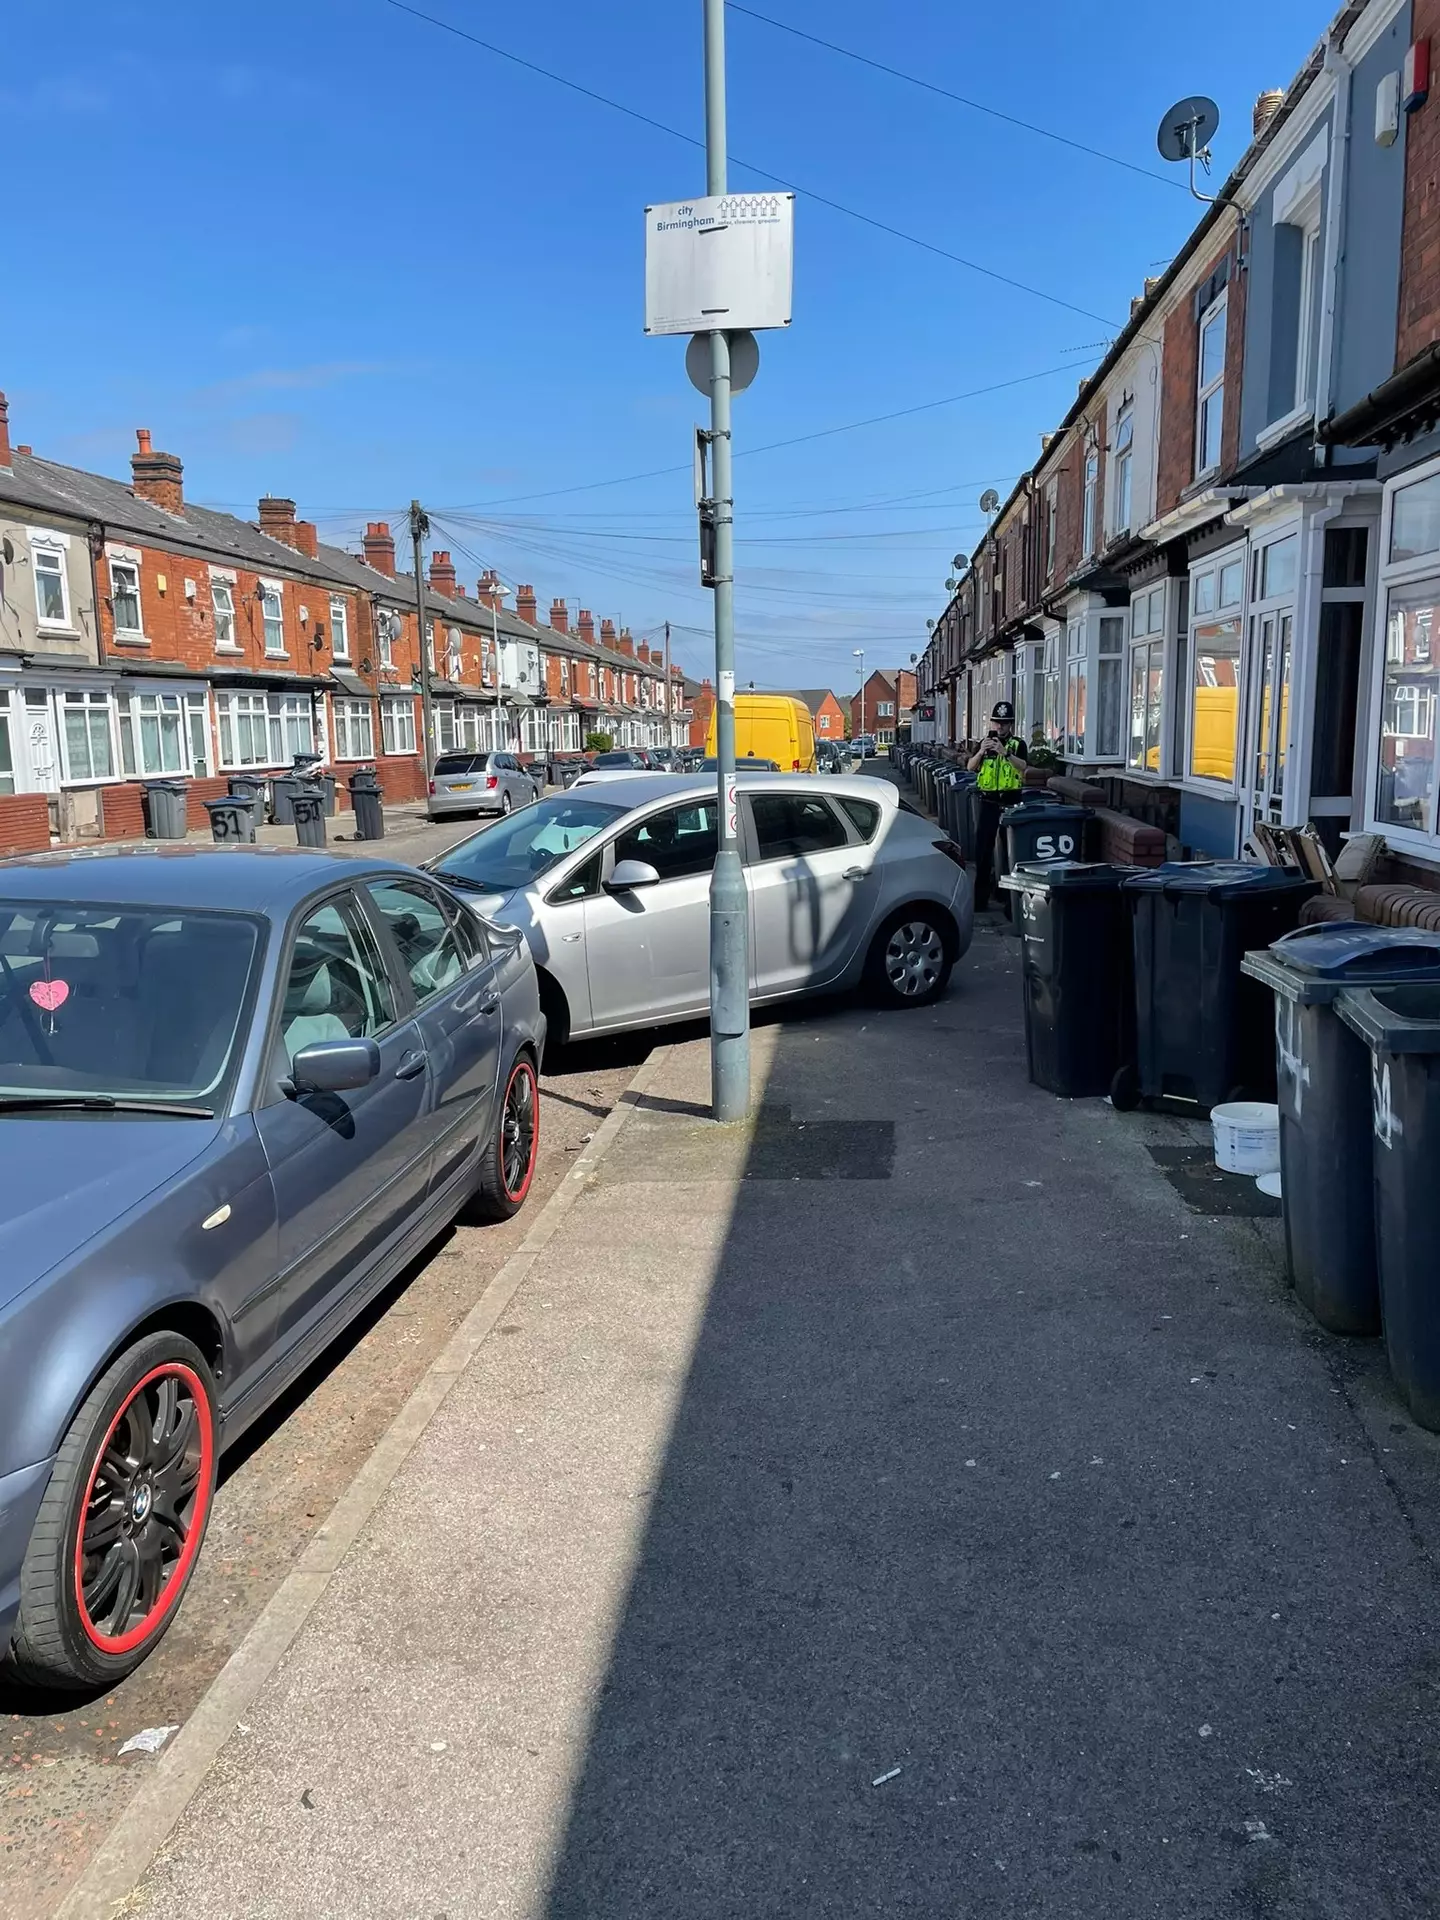 Police said this was the worst example of bad parking they saw on the day.